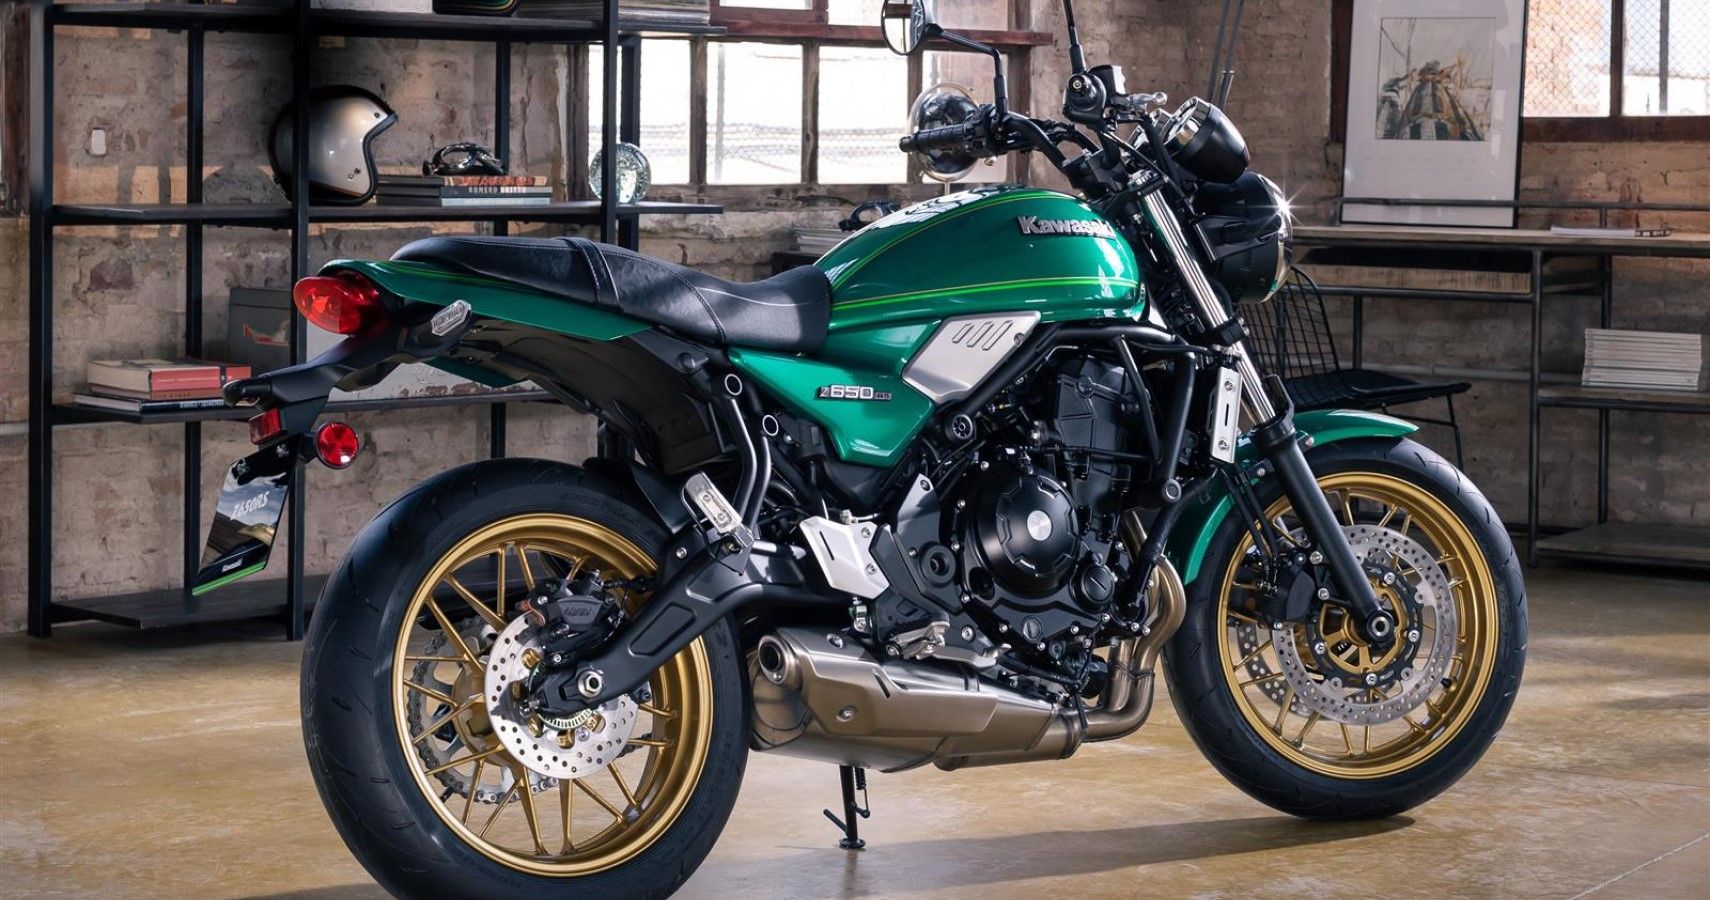 2022 Kawasaki Z650RS iconic ducktail design view